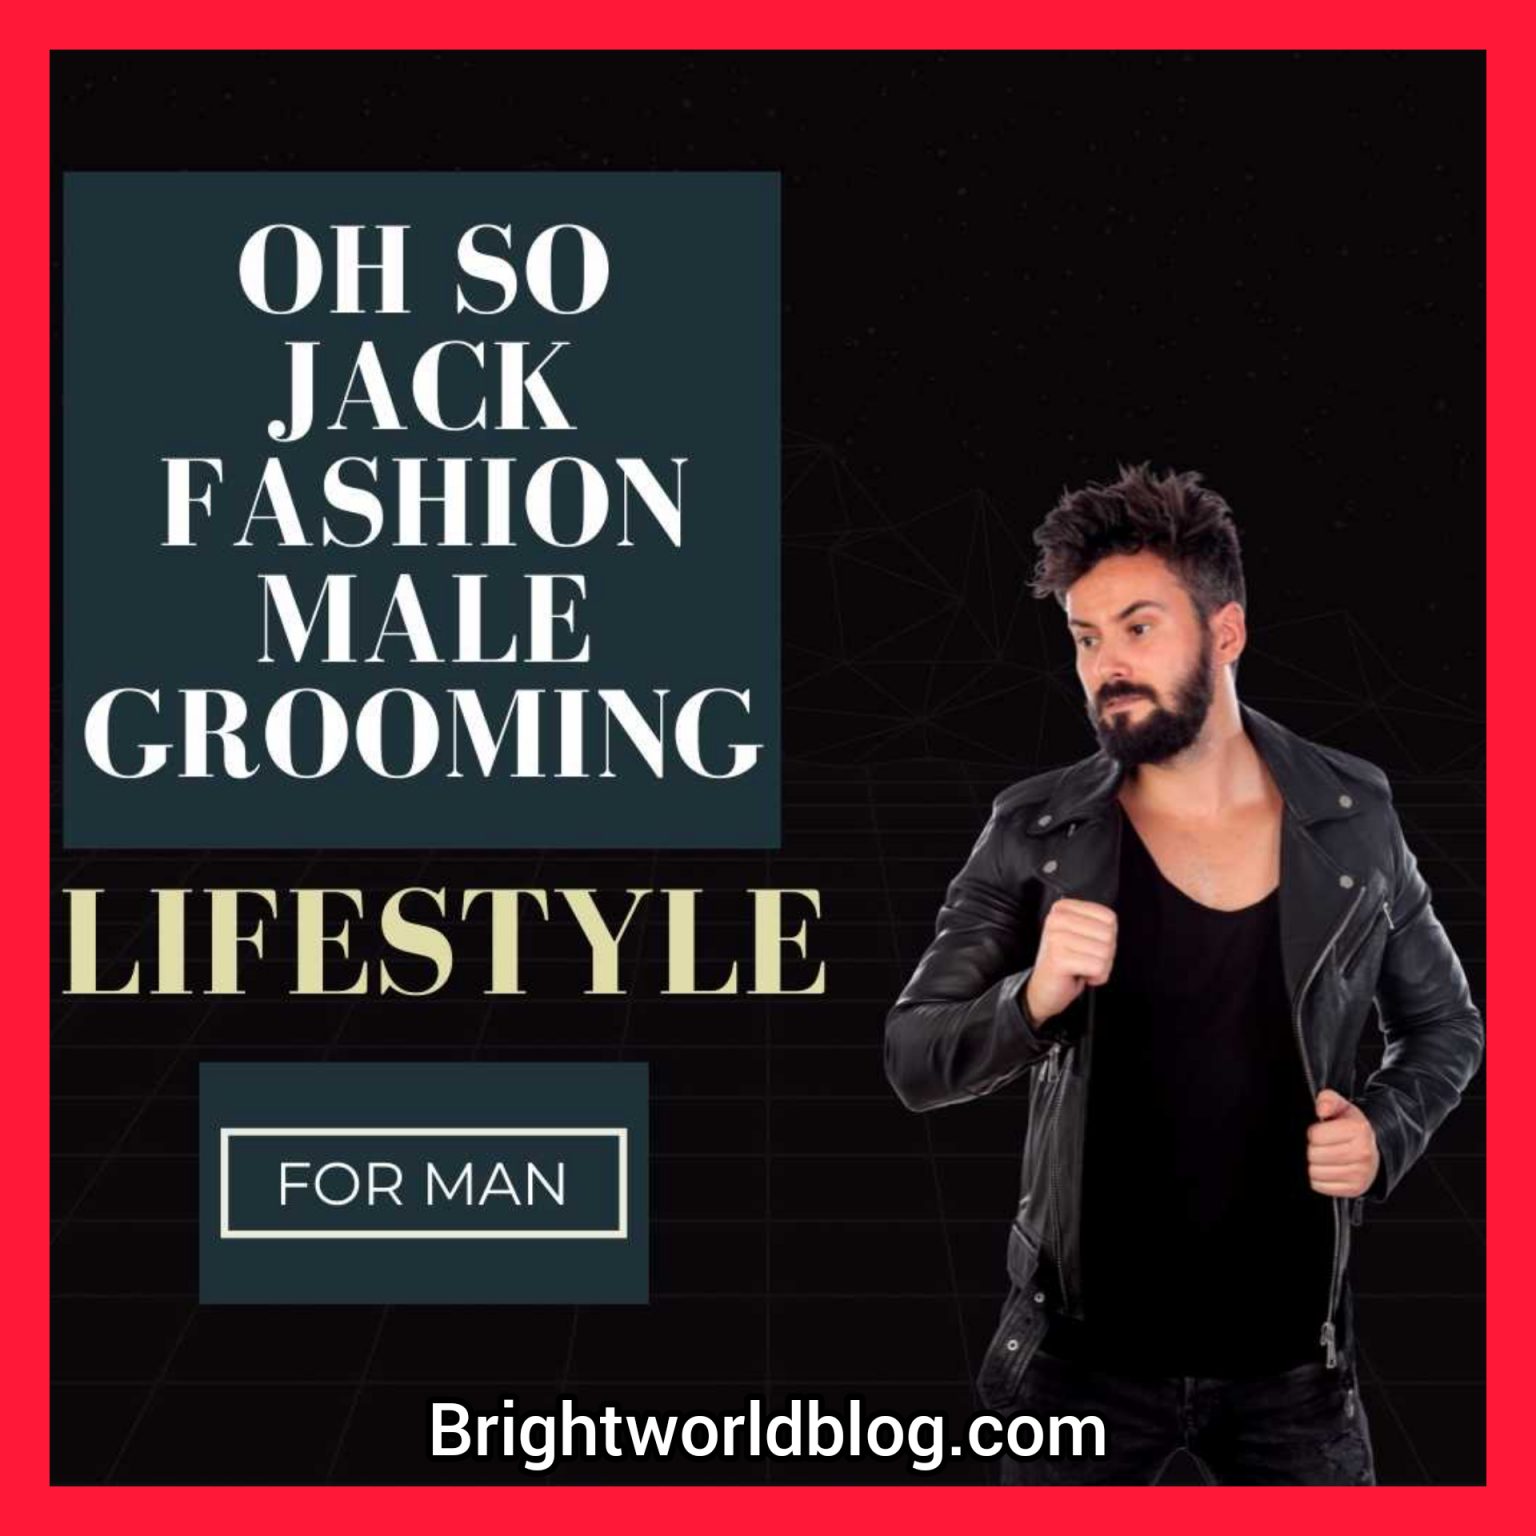 Oh So Jack Fashion Male Grooming Lifestyle - BrightWorld